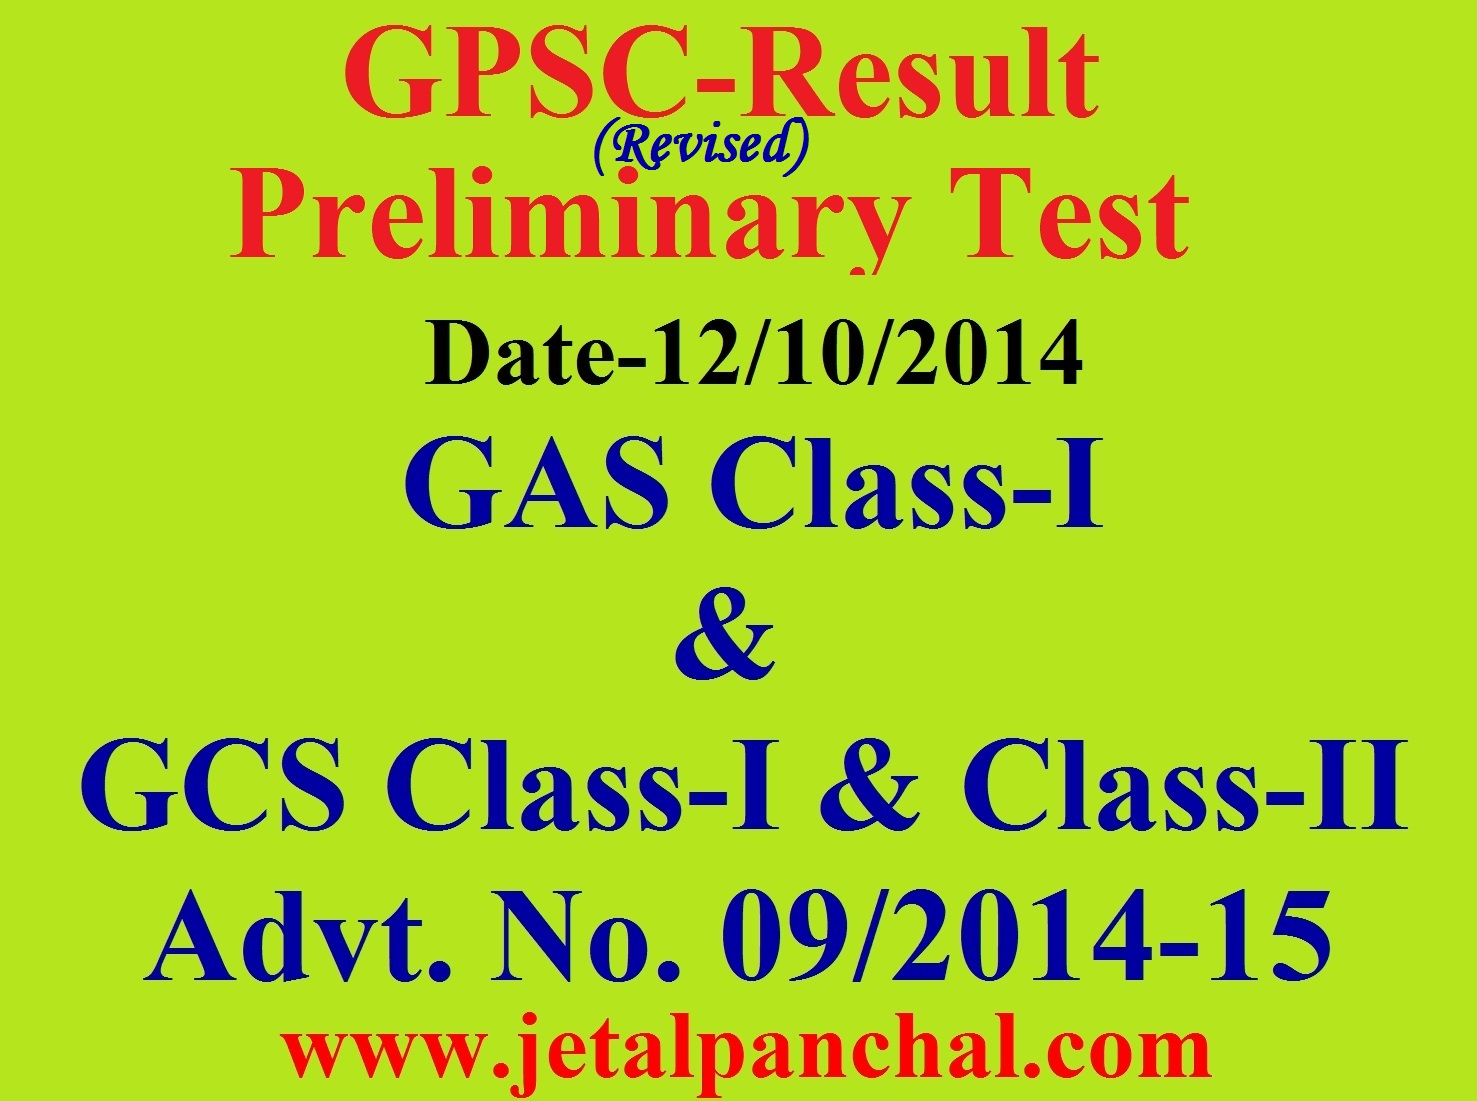 GPSC-GAS Class-I & GCS Class-I & Class-II Revised Result